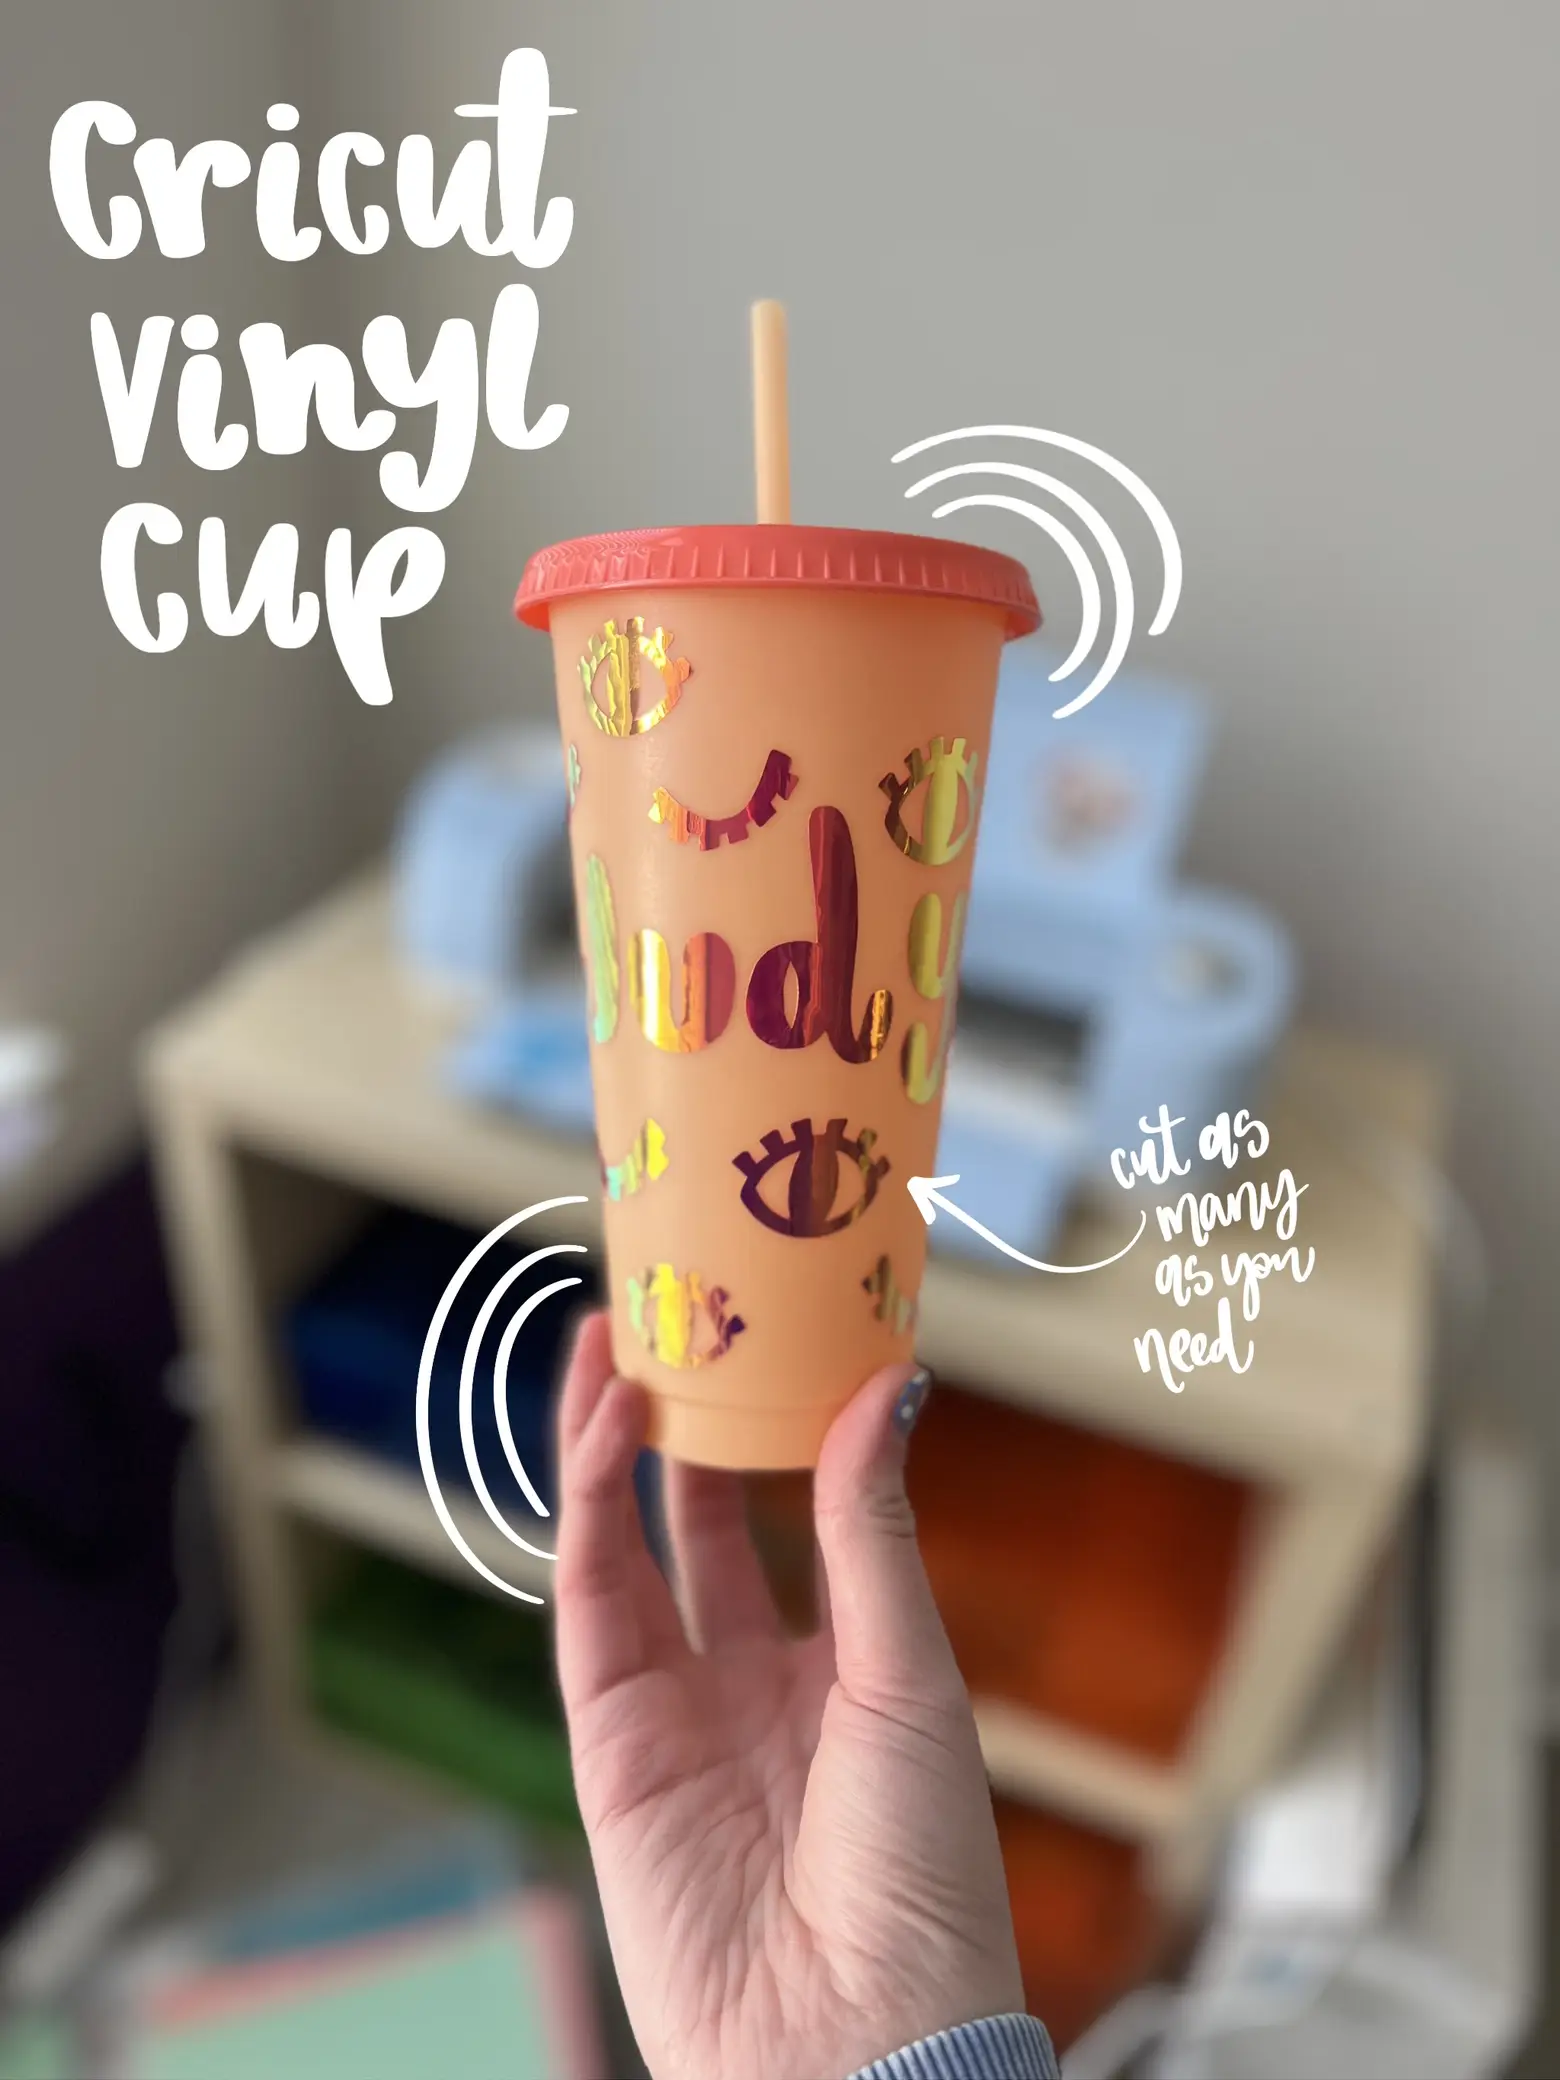 🧡 cricut vinyl cups! 🧡, Gallery posted by Dani ✨